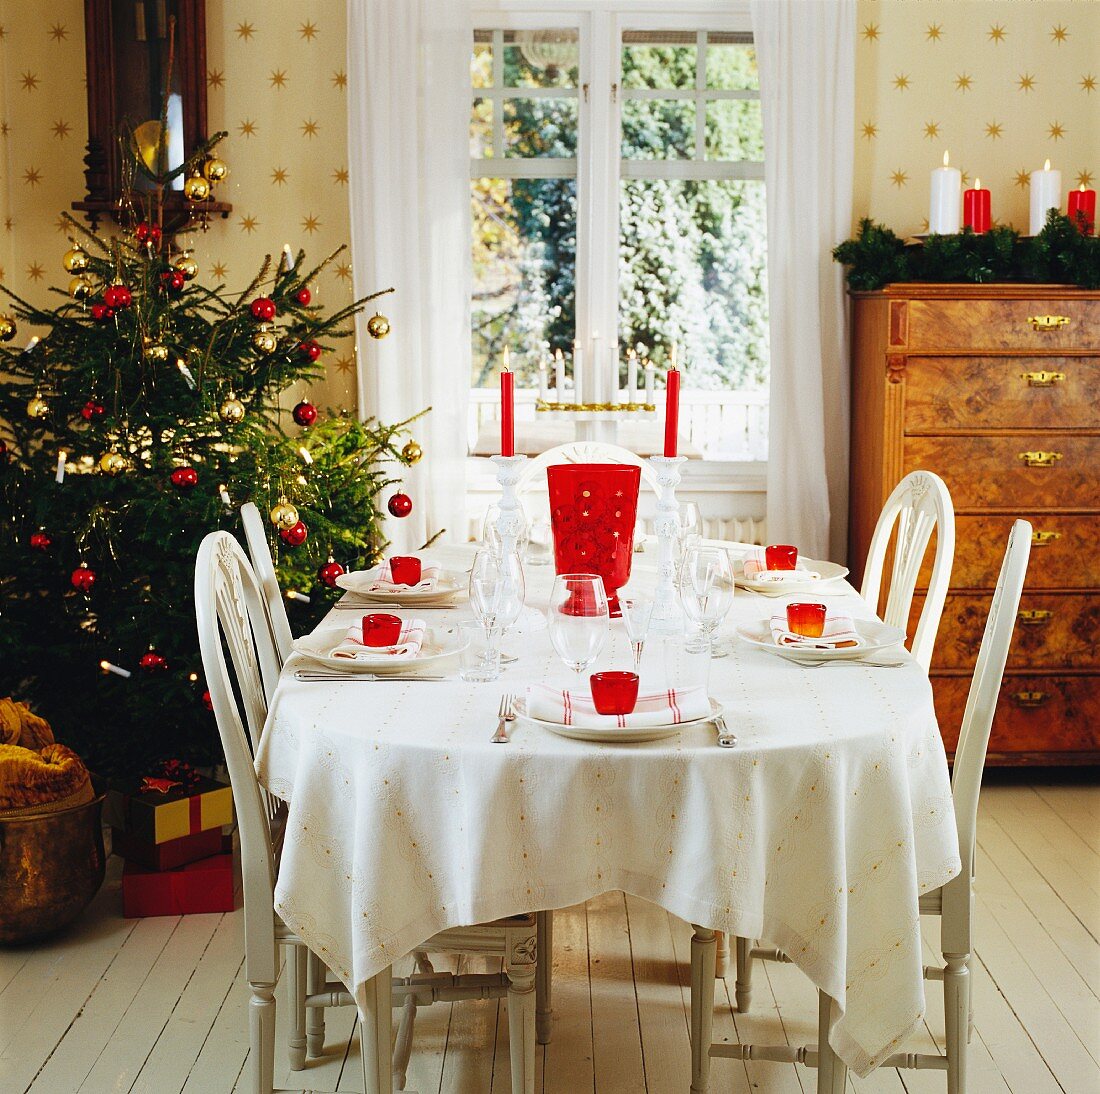 Table laid for Christmas (Sweden)